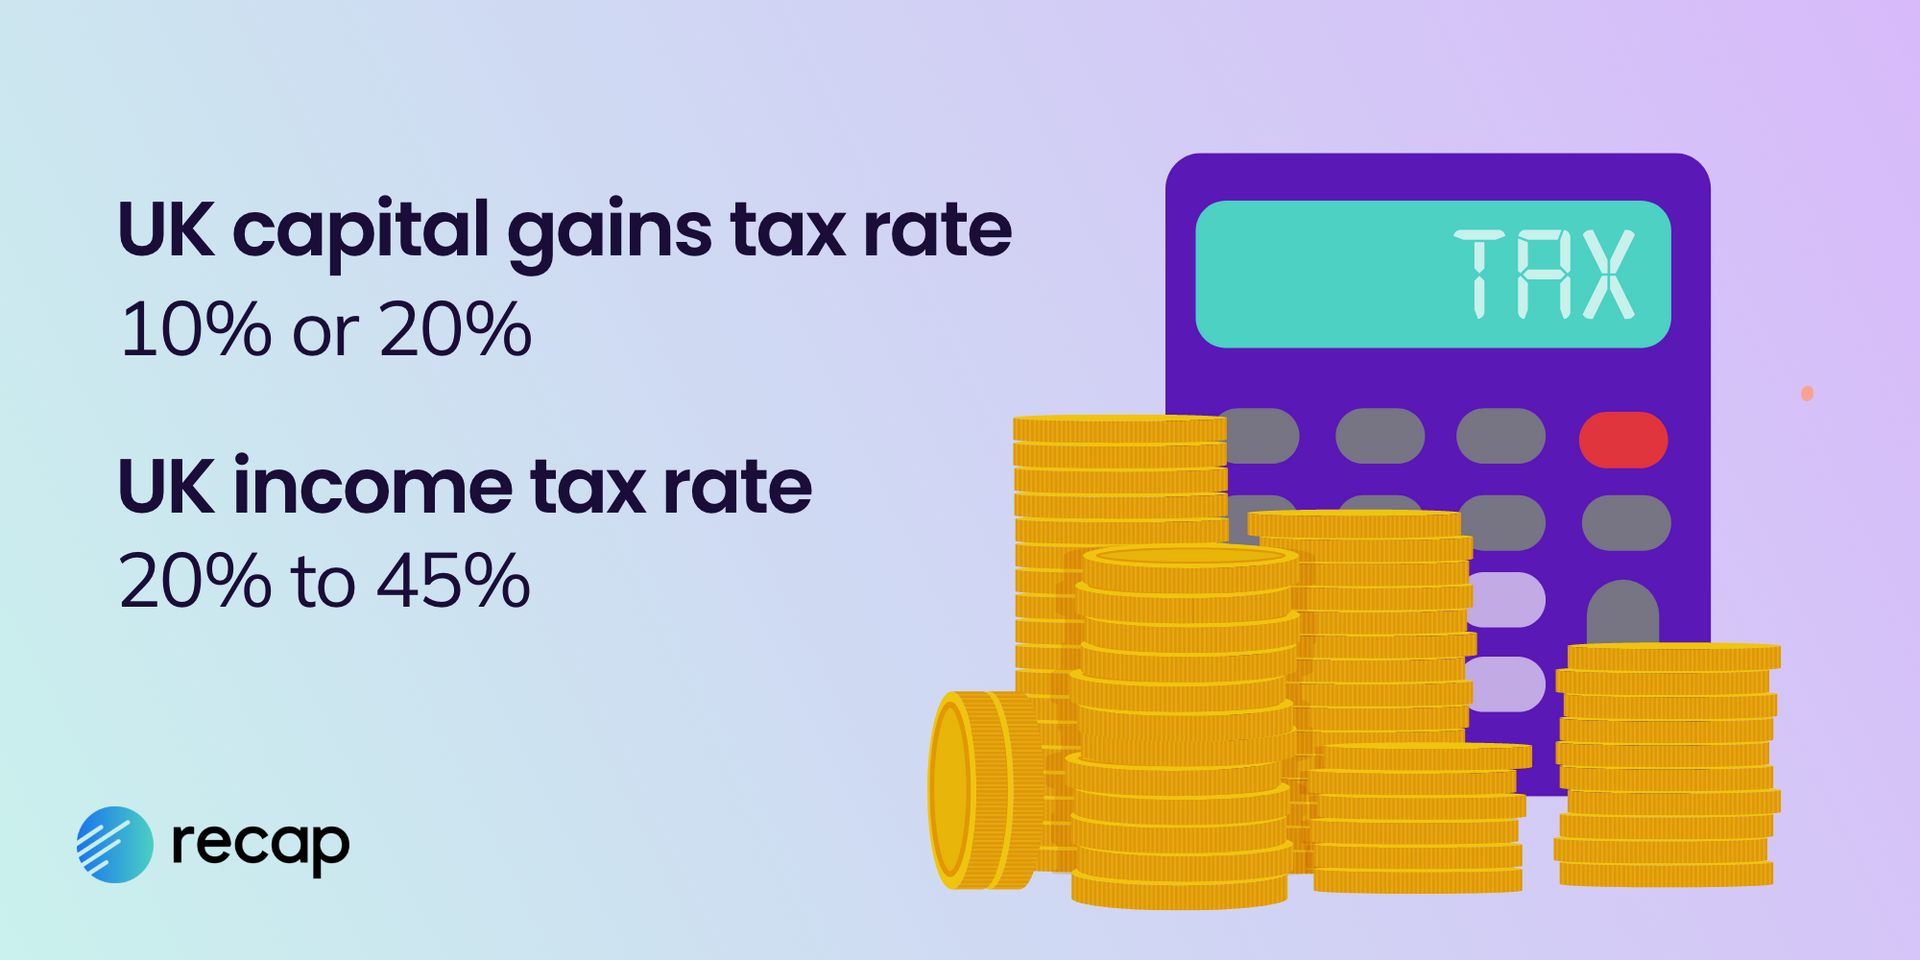 An infographic stating the UK capital gains tax rate is 10% or 20% and income tax rate is between 20% to 45%